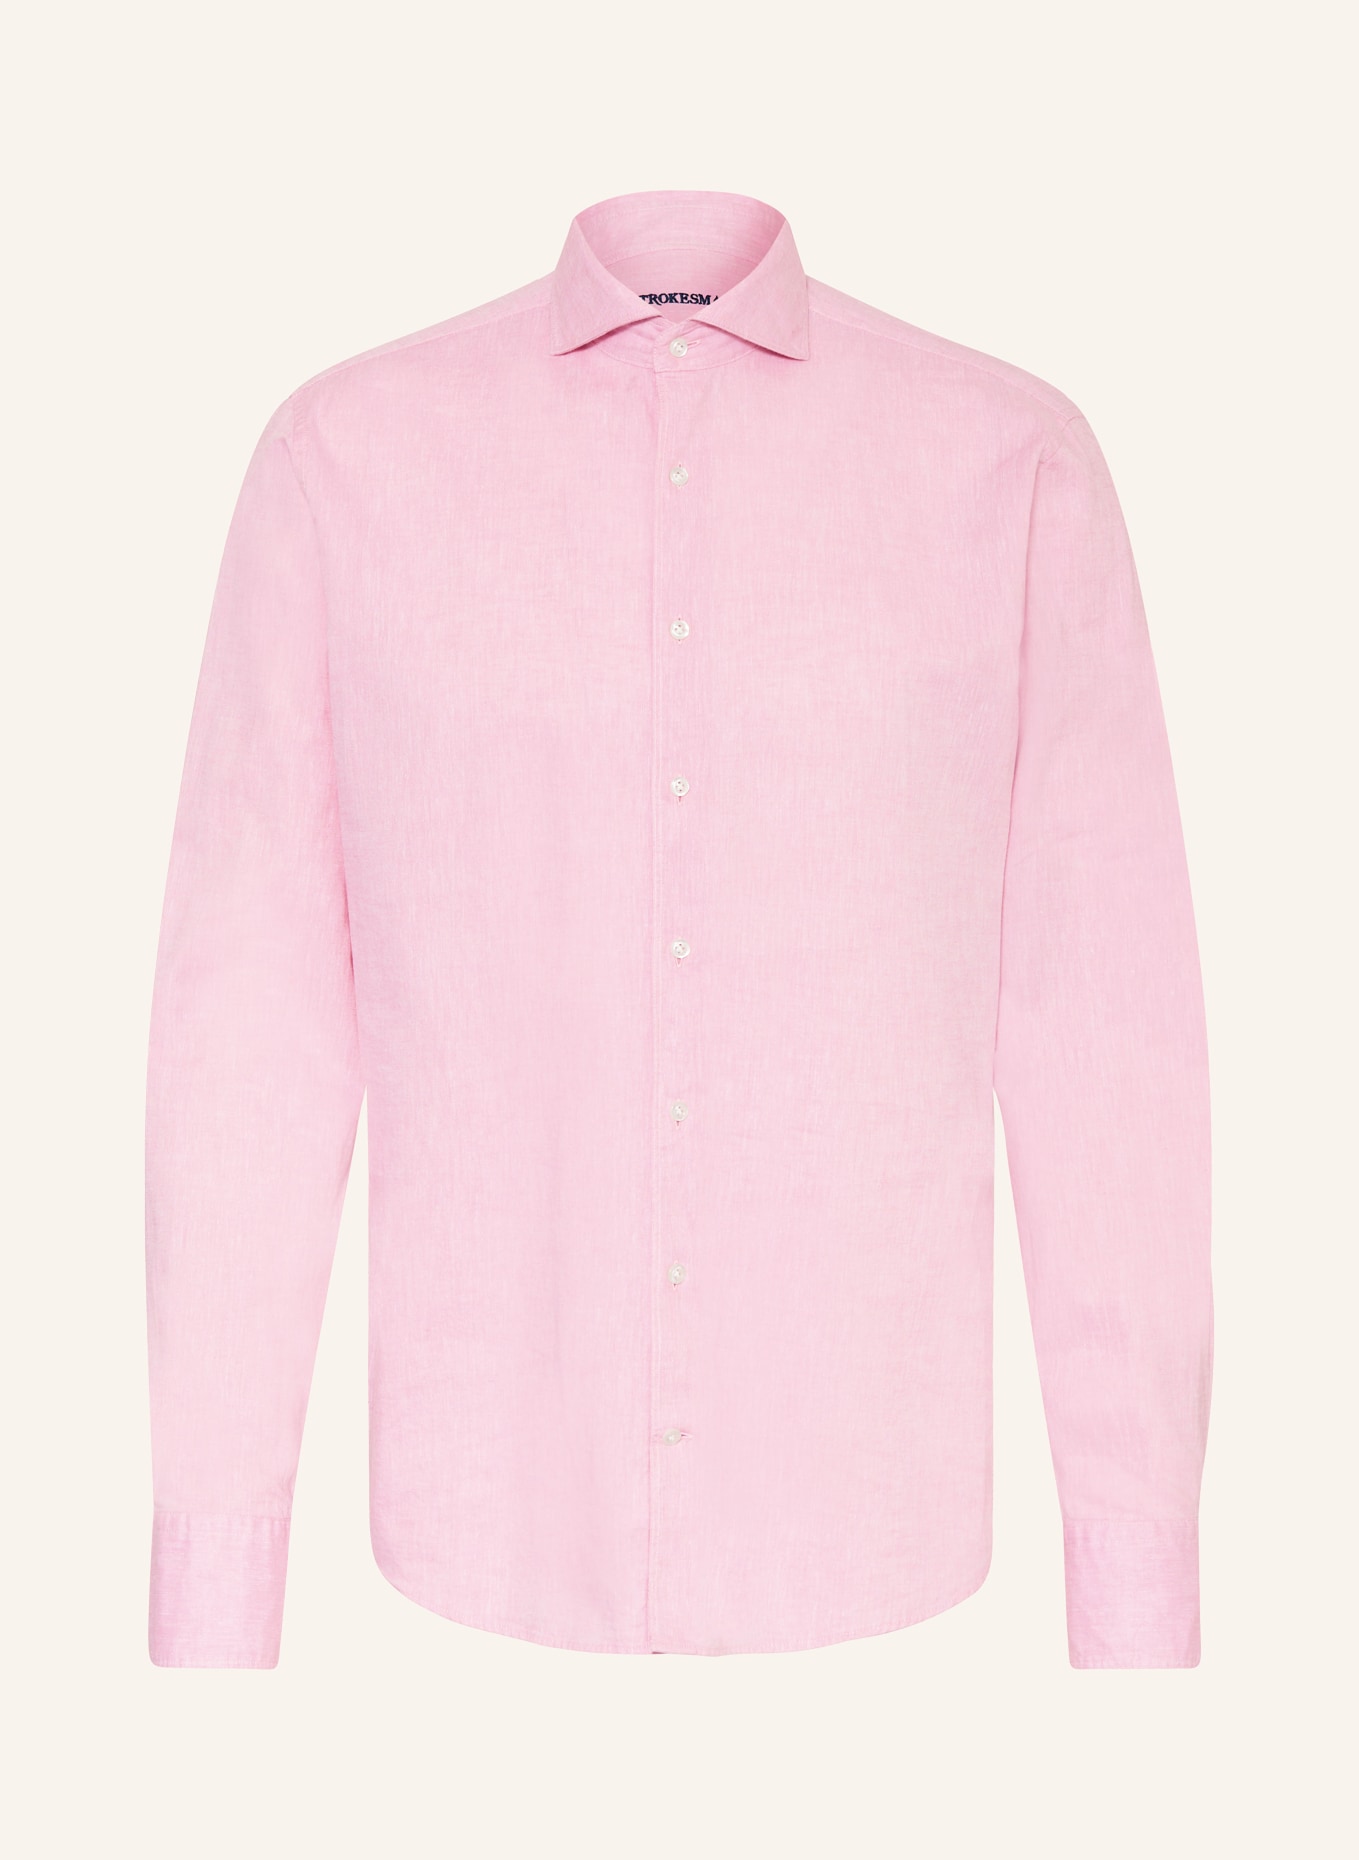 STROKESMAN'S Shirt regular fit with linen, Color: PINK (Image 1)